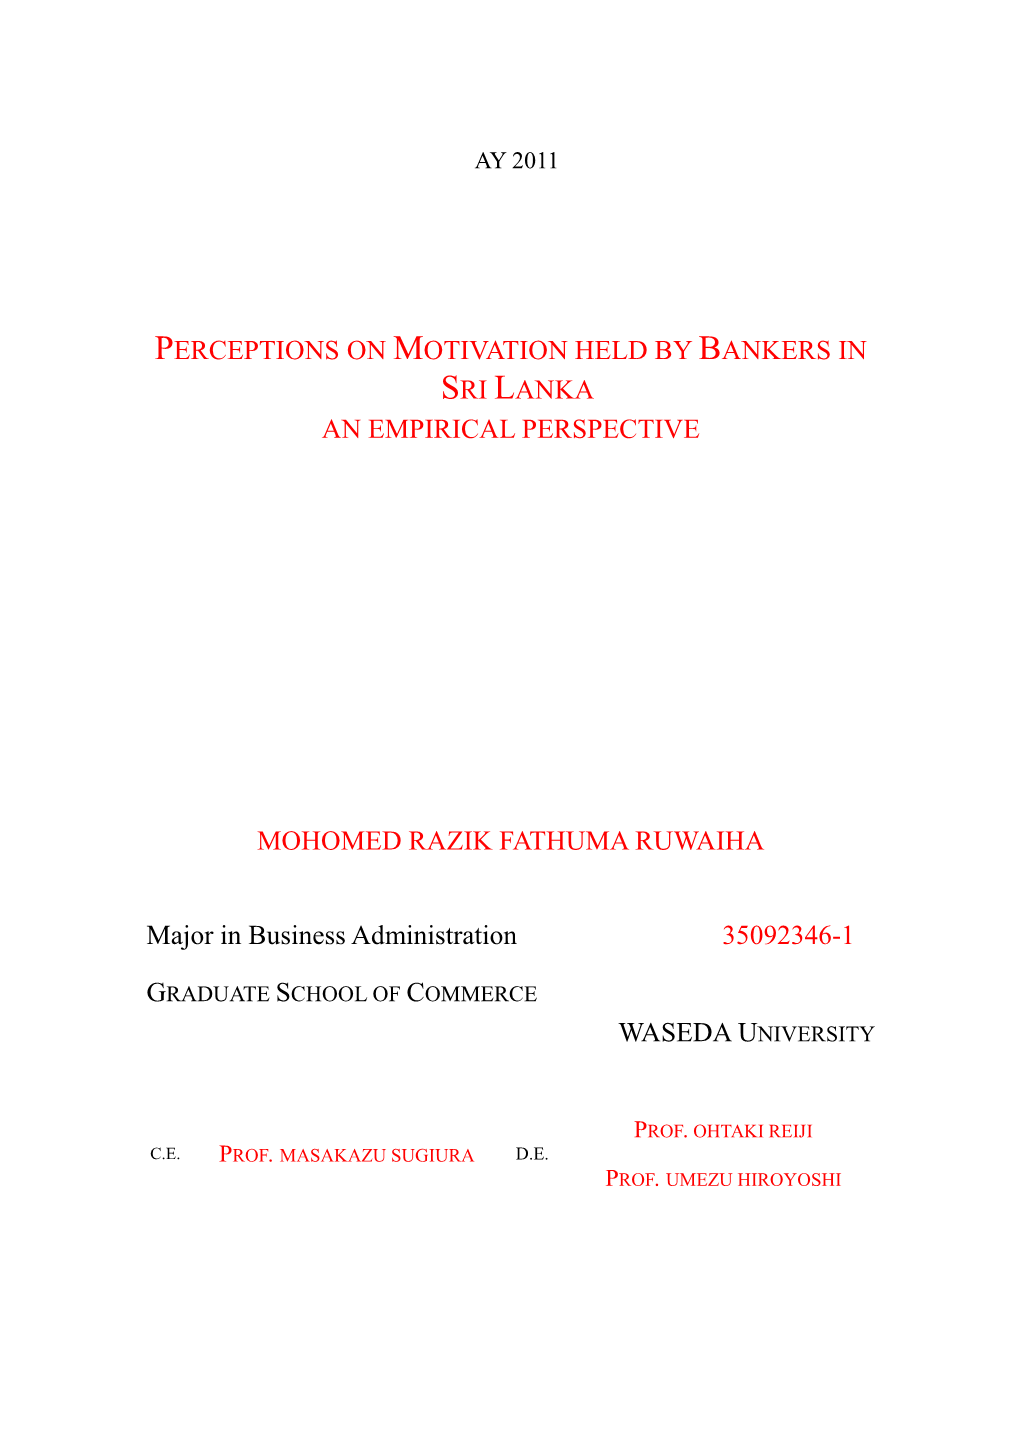 Perceptions on Motivation Held by Bankers in Sri Lanka an Empirical Perspective